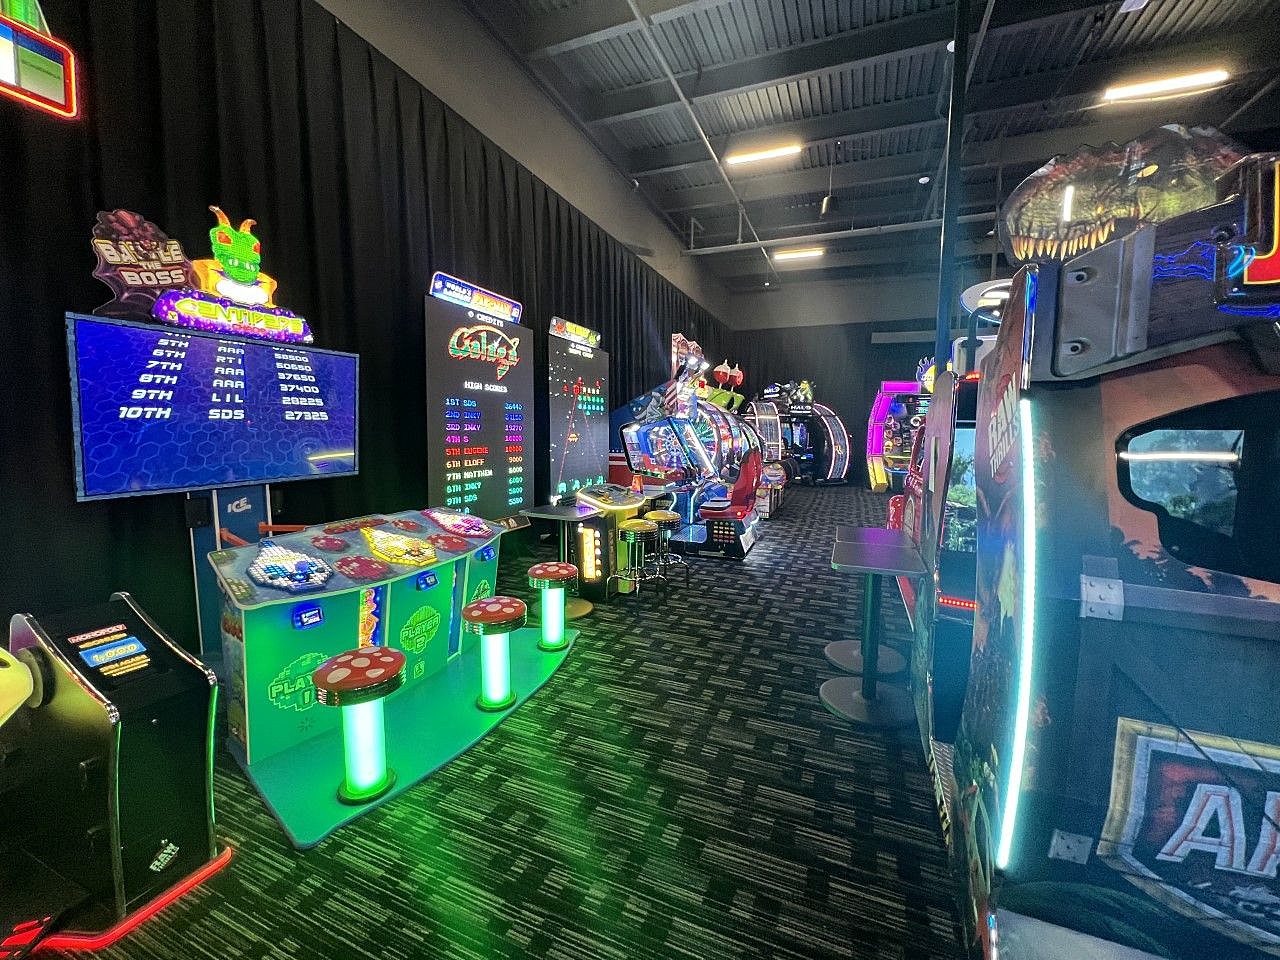 A Look Inside Lubbock's New Dave & Buster's